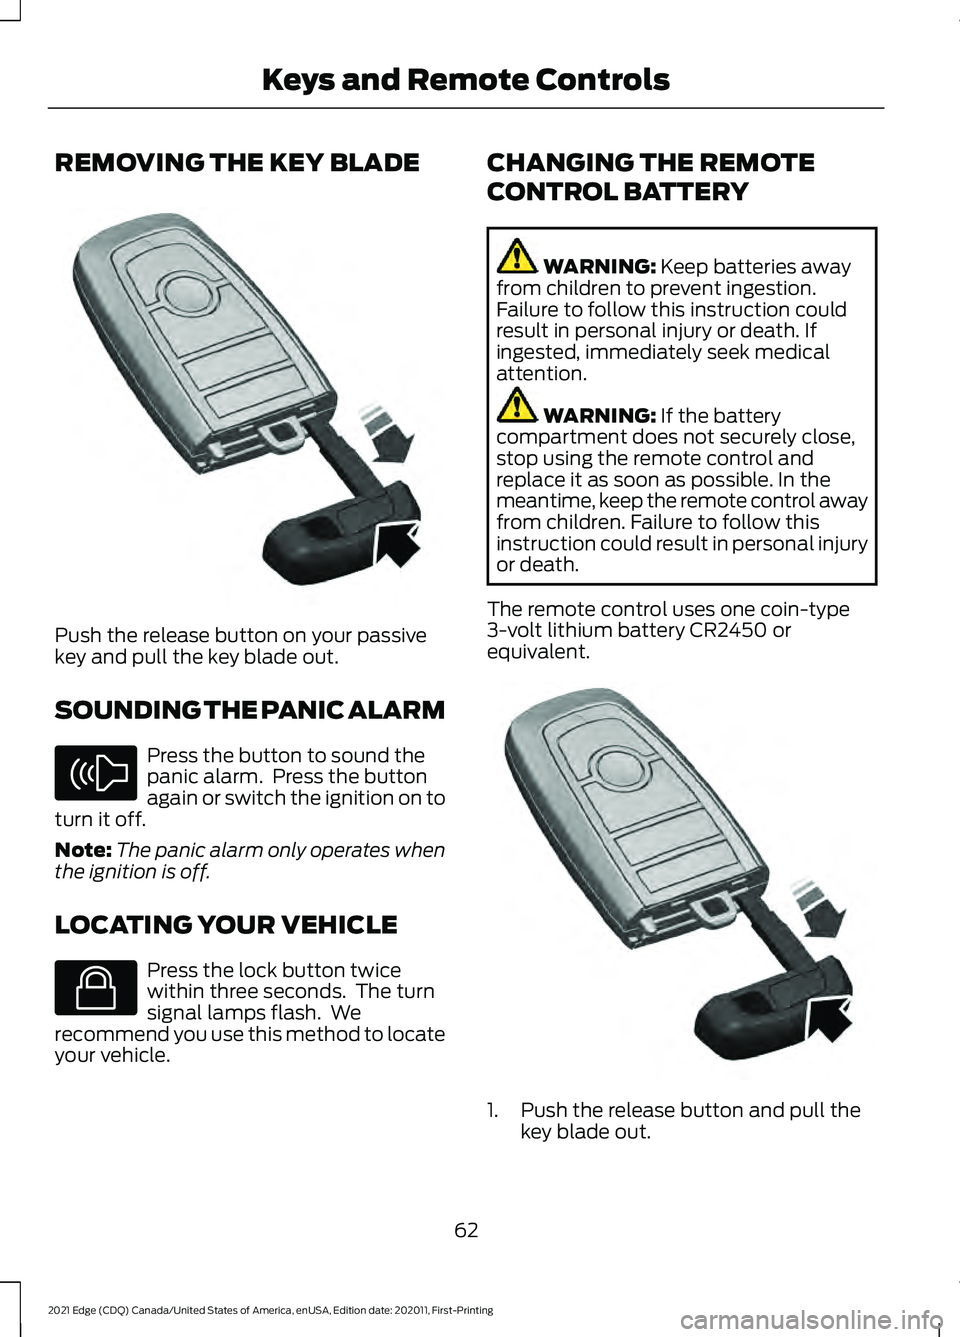 FORD EDGE 2021 Owners Guide REMOVING THE KEY BLADE
Push the release button on your passive
key and pull the key blade out.
SOUNDING THE PANIC ALARM
Press the button to sound the
panic alarm.  Press the button
again or switch the